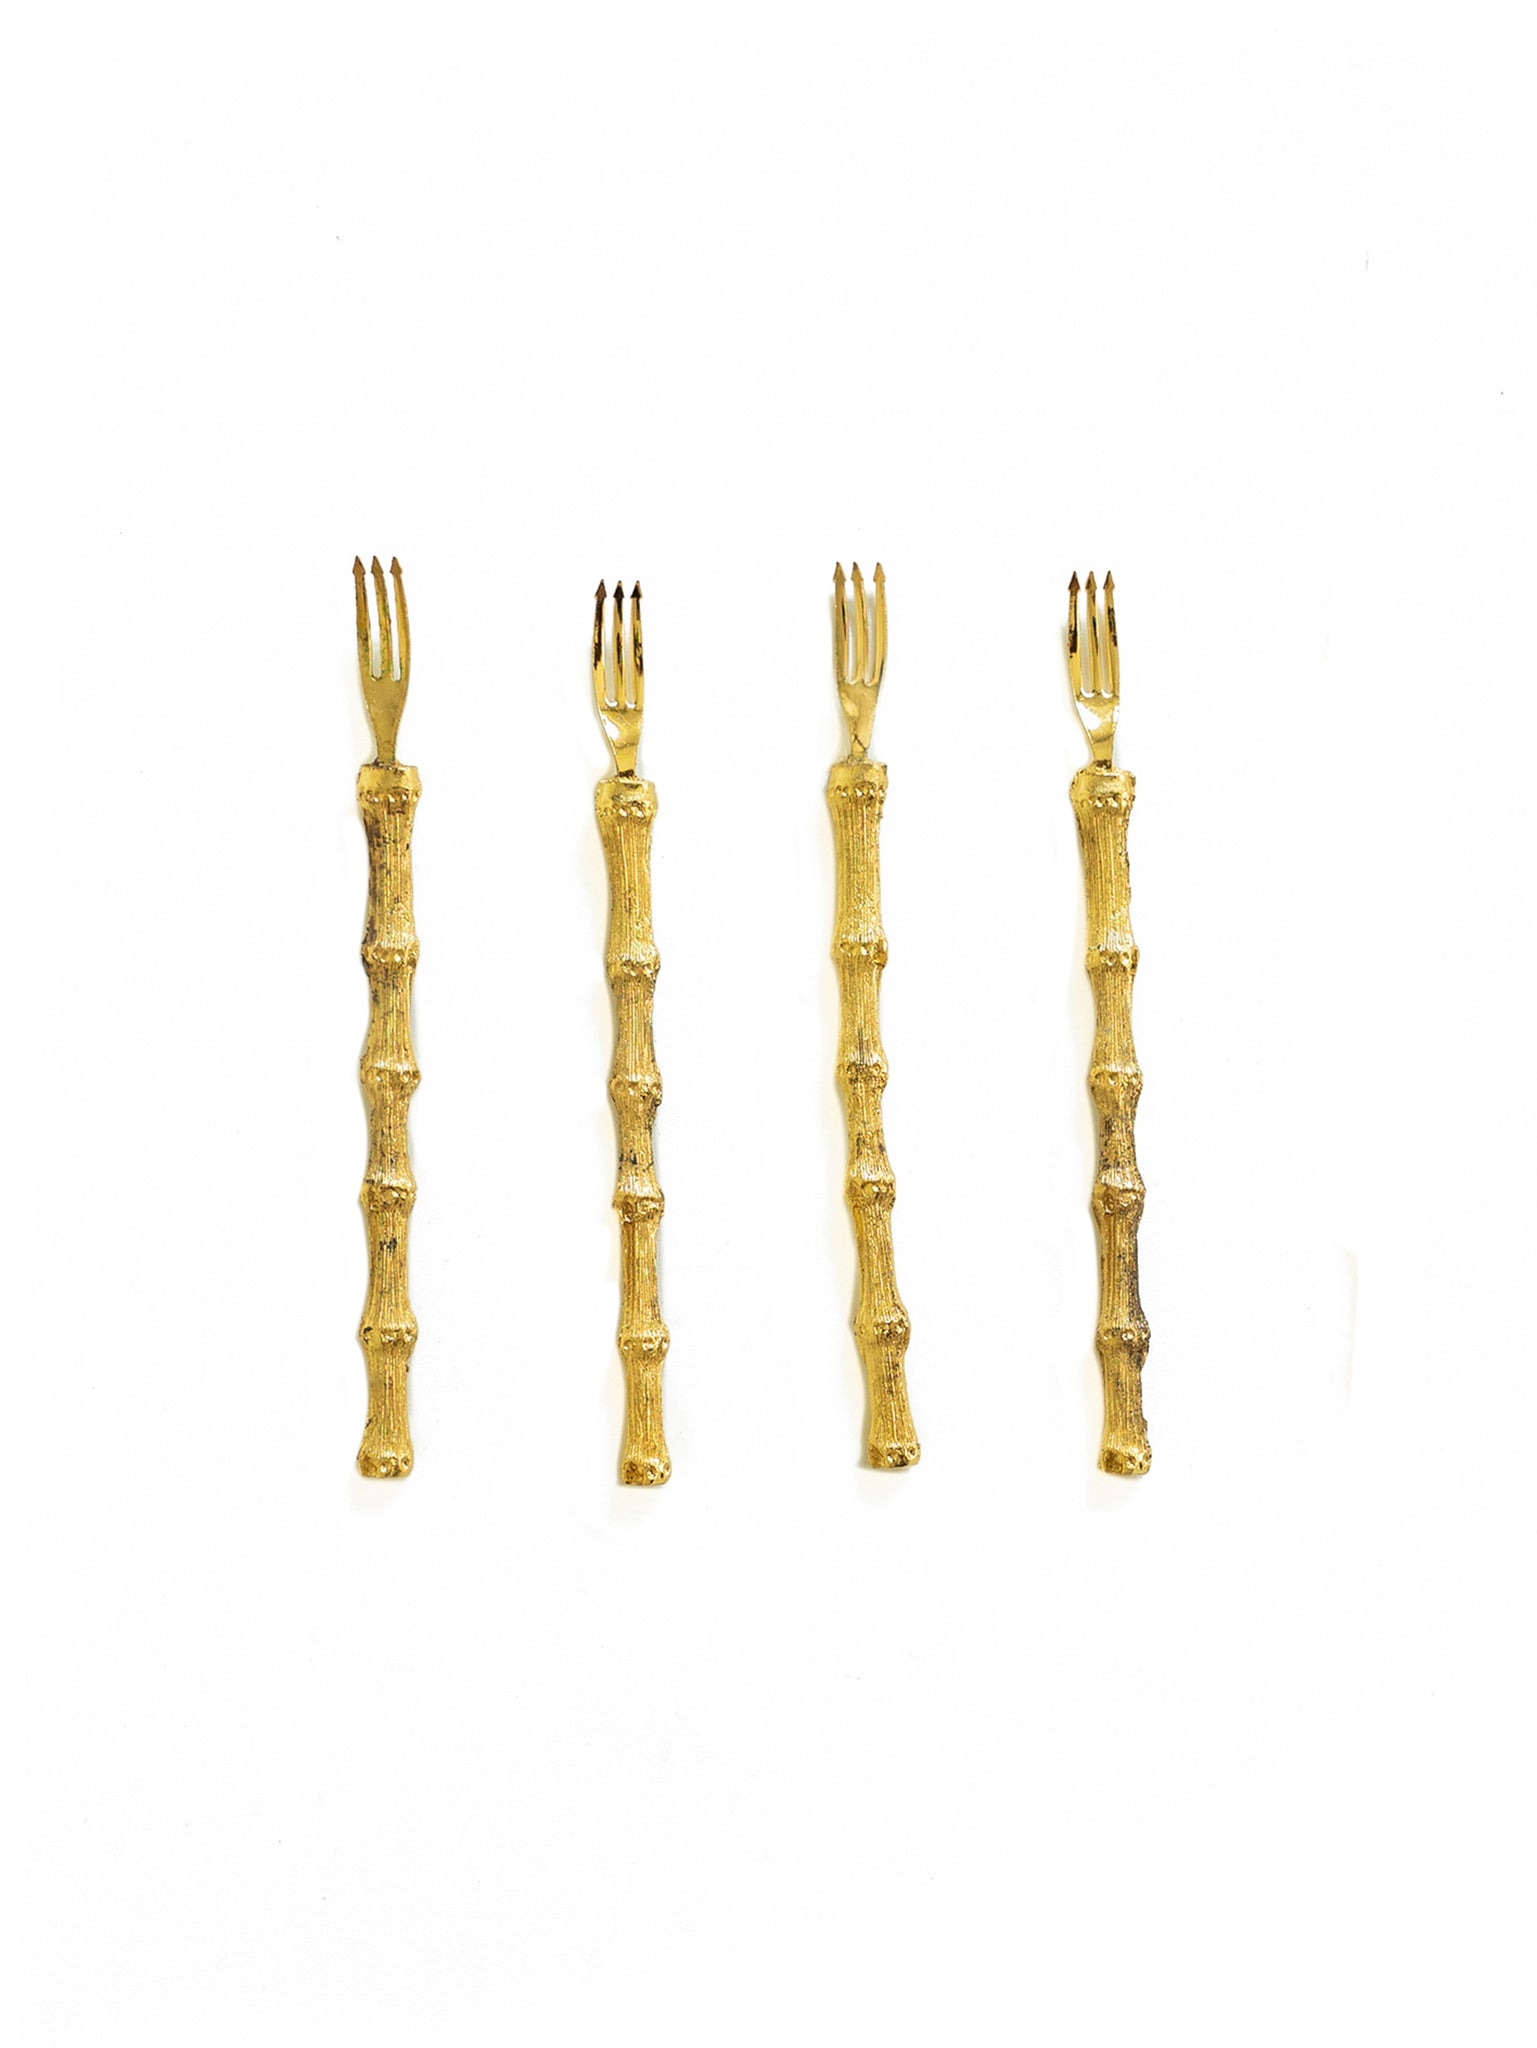 Vintage 1960s Gold Bamboo Handled Oyster Forks Weston Table